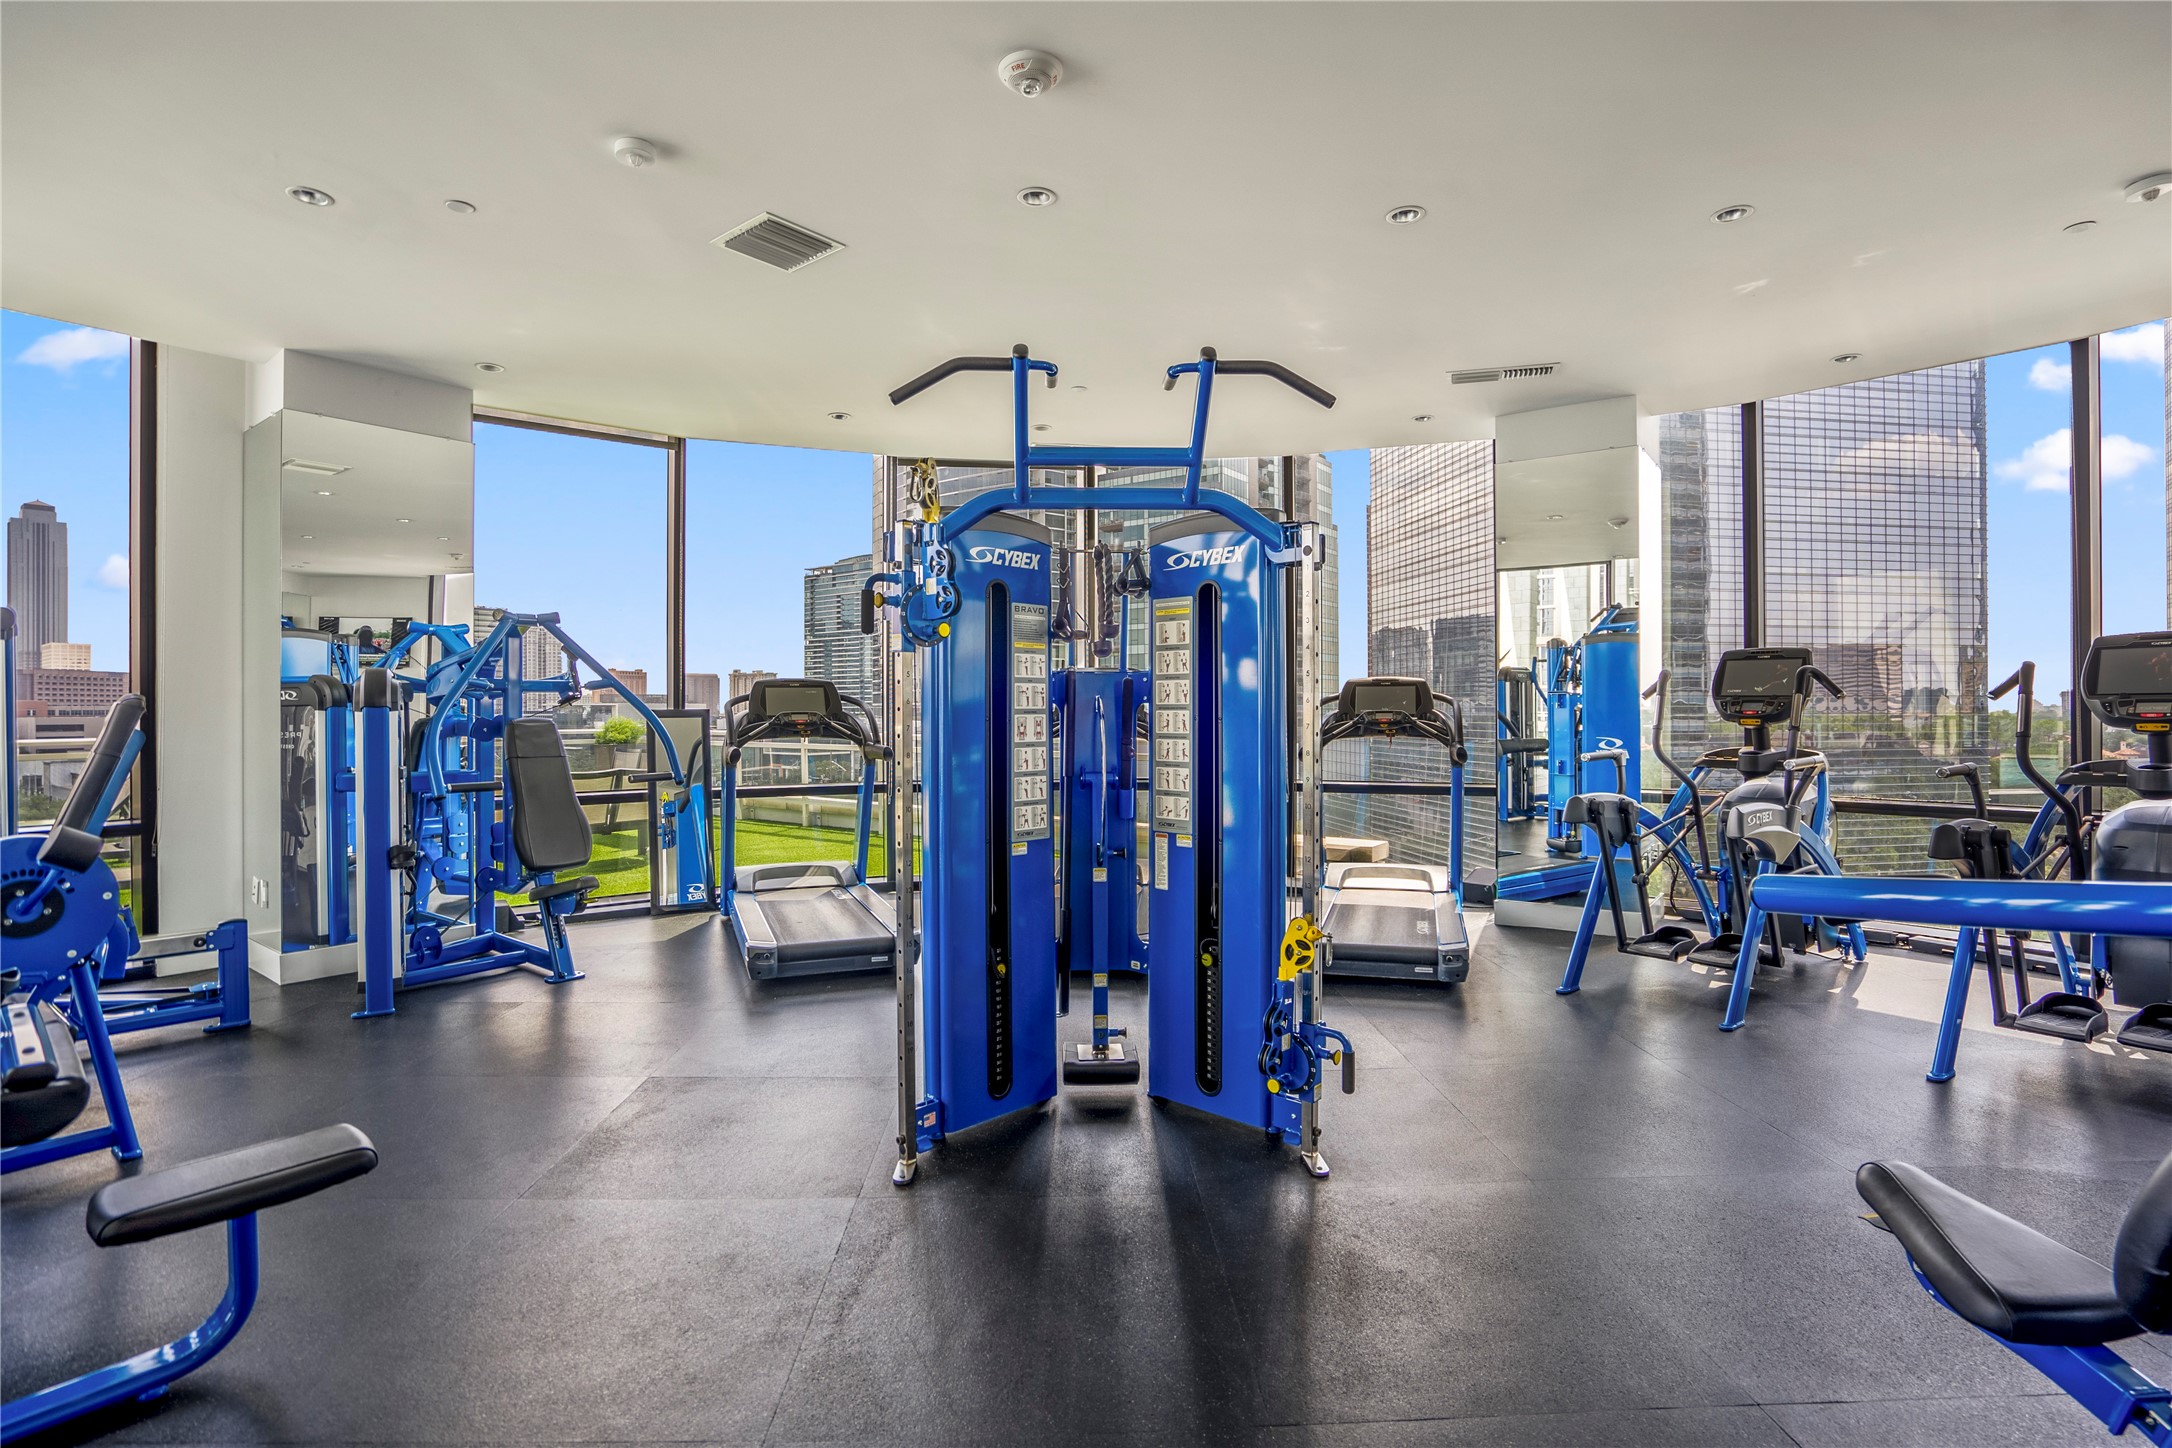 Astoria also has a fitness area with plenty of exercise equipment!